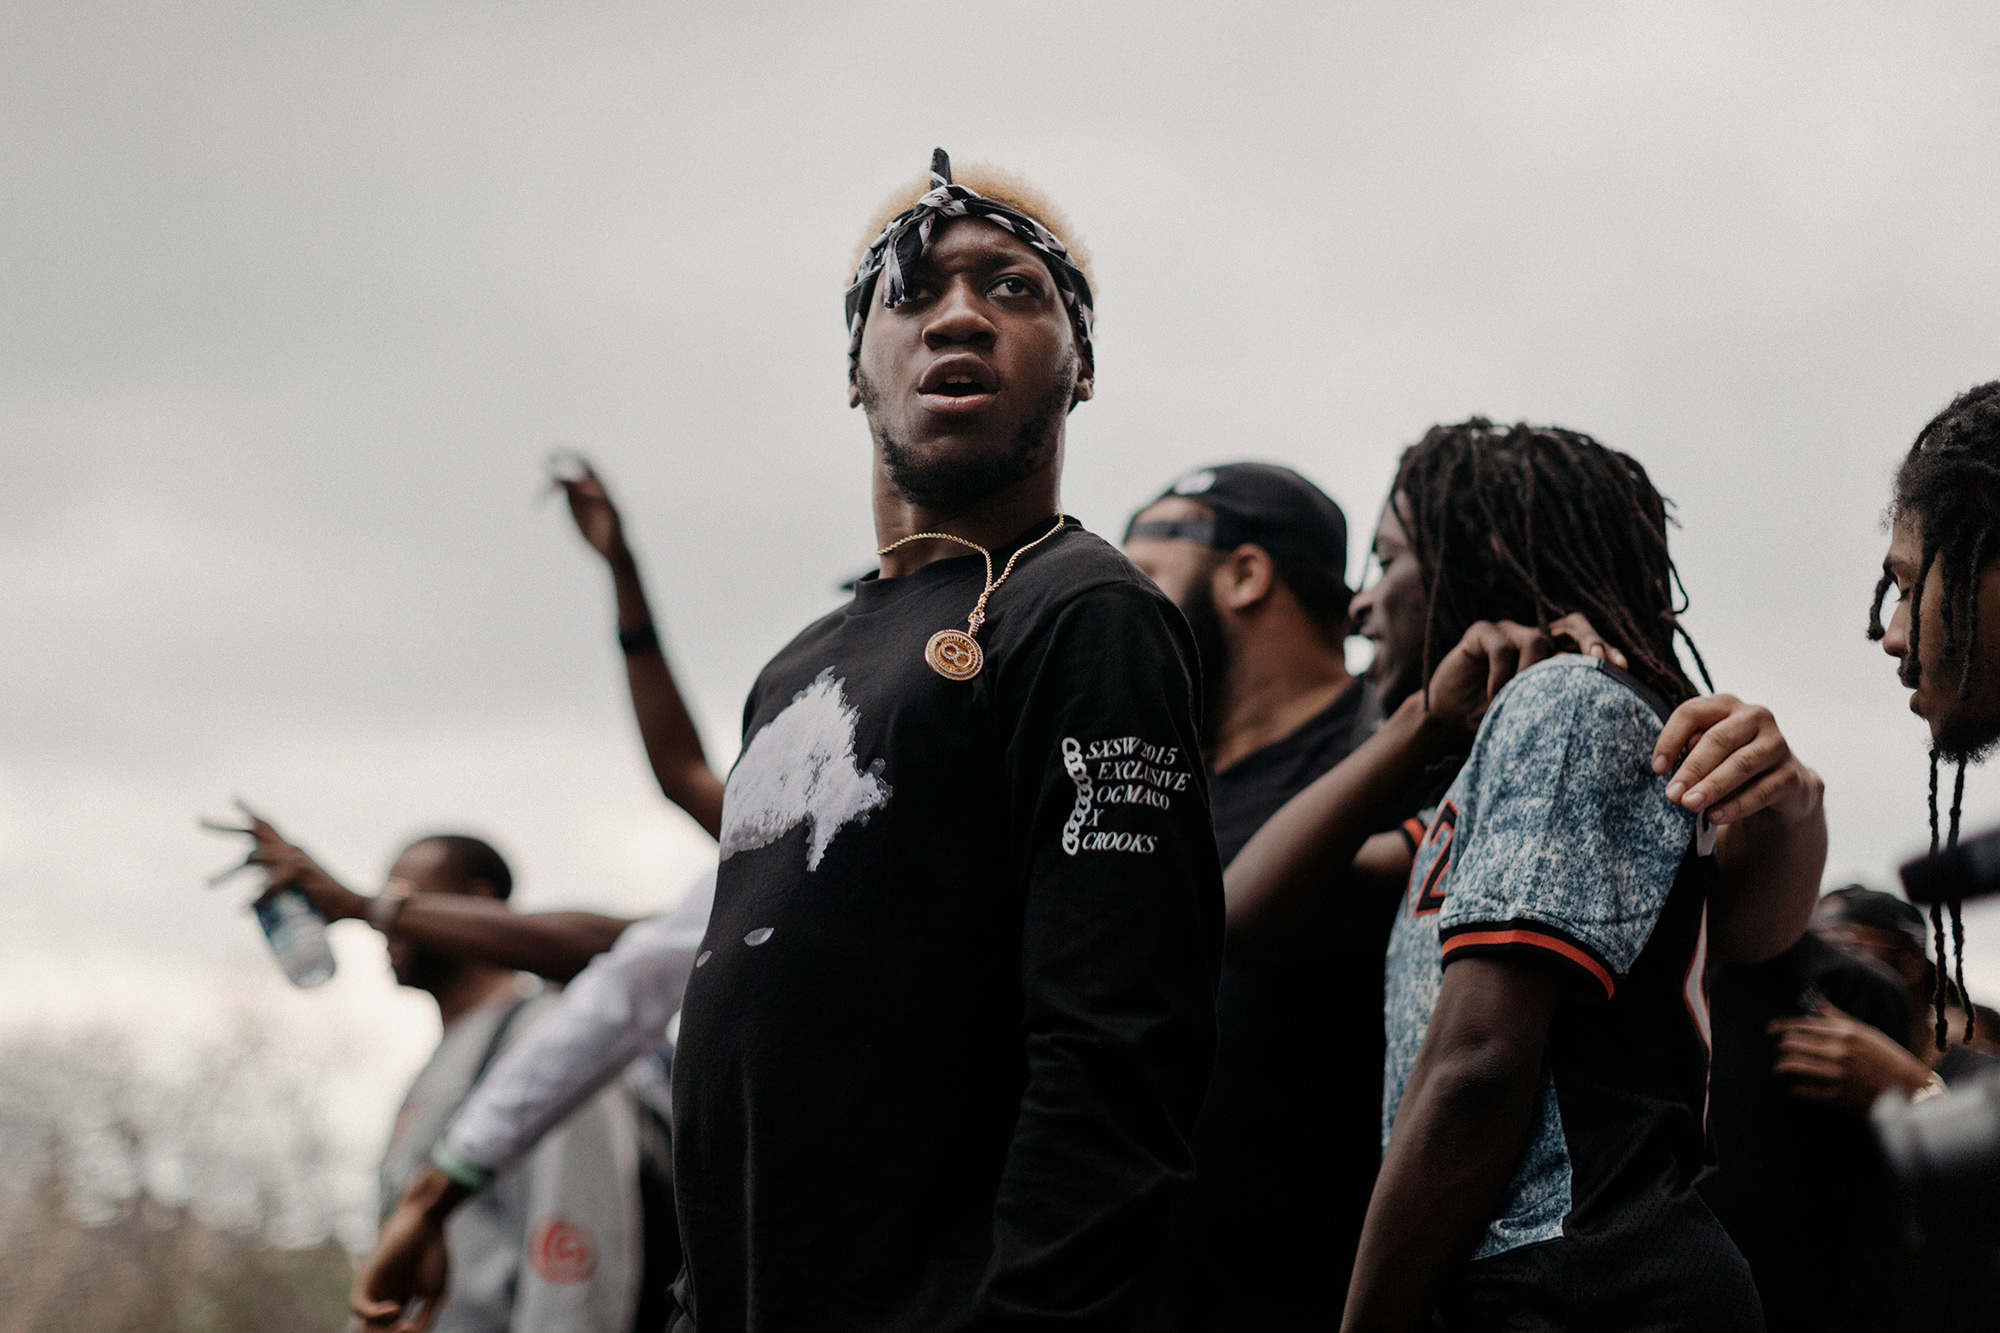 OG Maco, rapper, and his crew, perform at the Nice Kicks showcase at the South by Southwest Music Festival in Austin, Texas, photographed by Houston hip hop photographer, Todd Spoth.